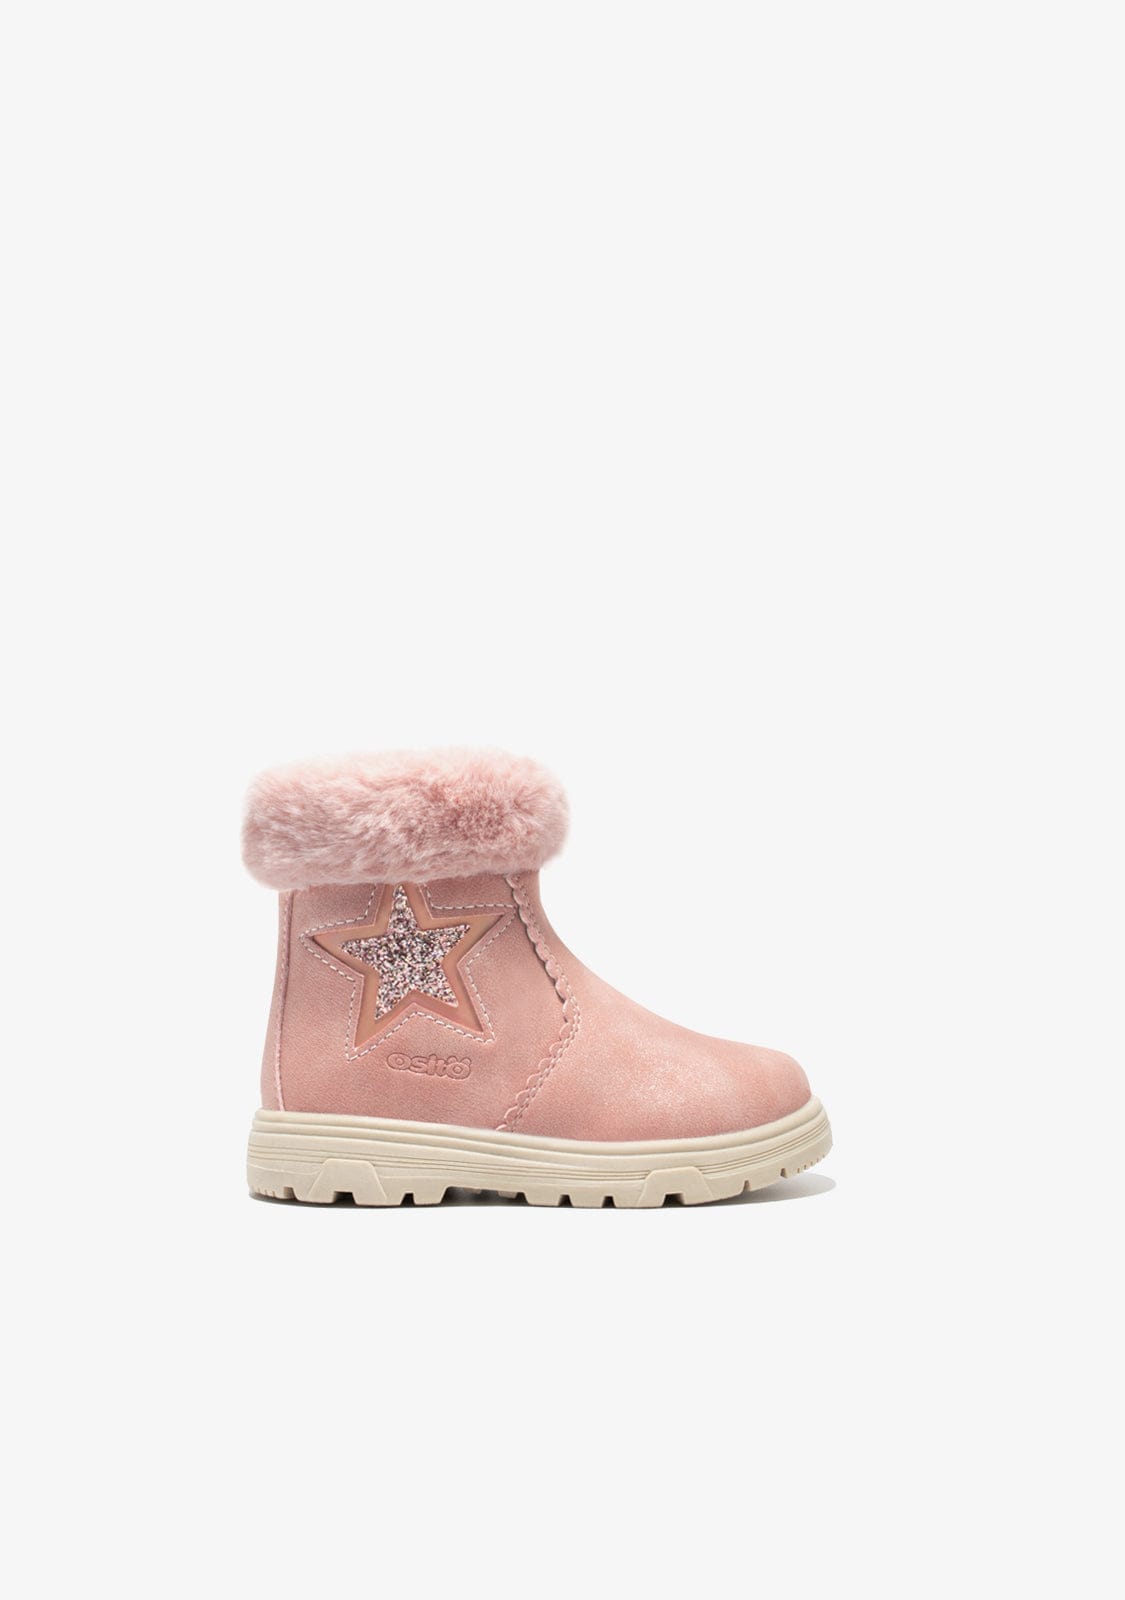 OSITO Shoes Baby's Pink Star Fur Ankle Boots